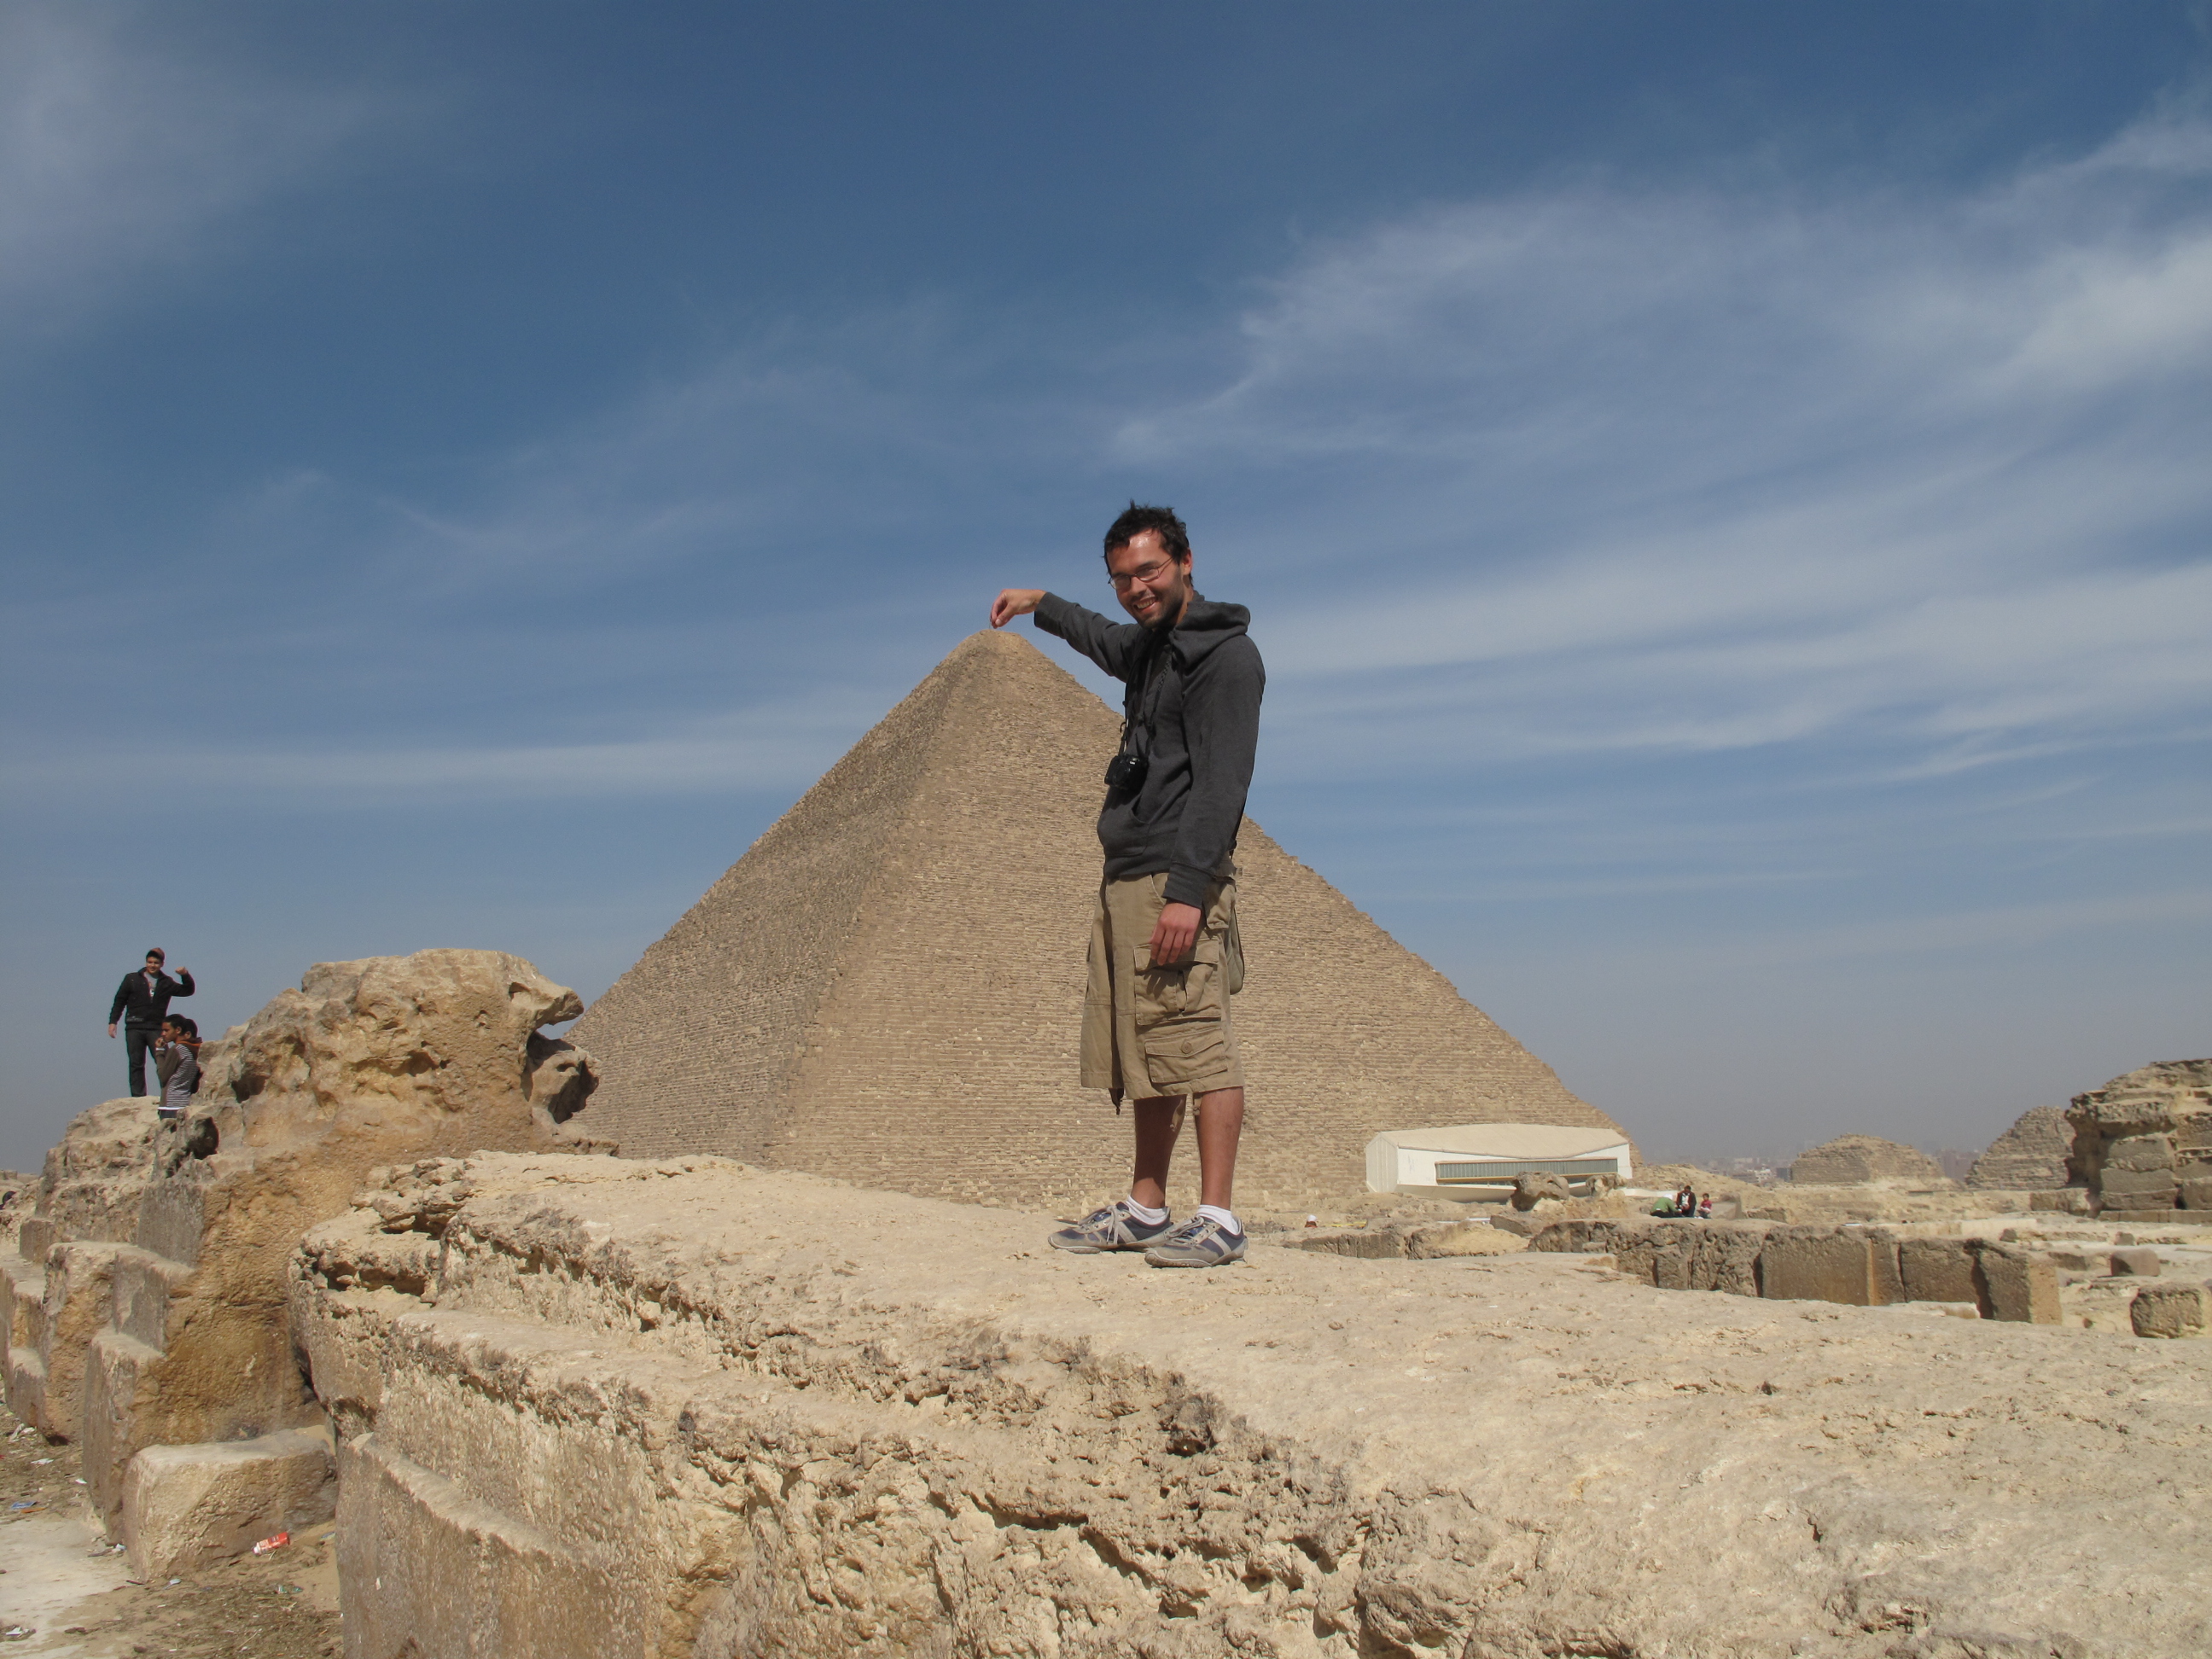 This is a picture of in front of one of the pyramids.